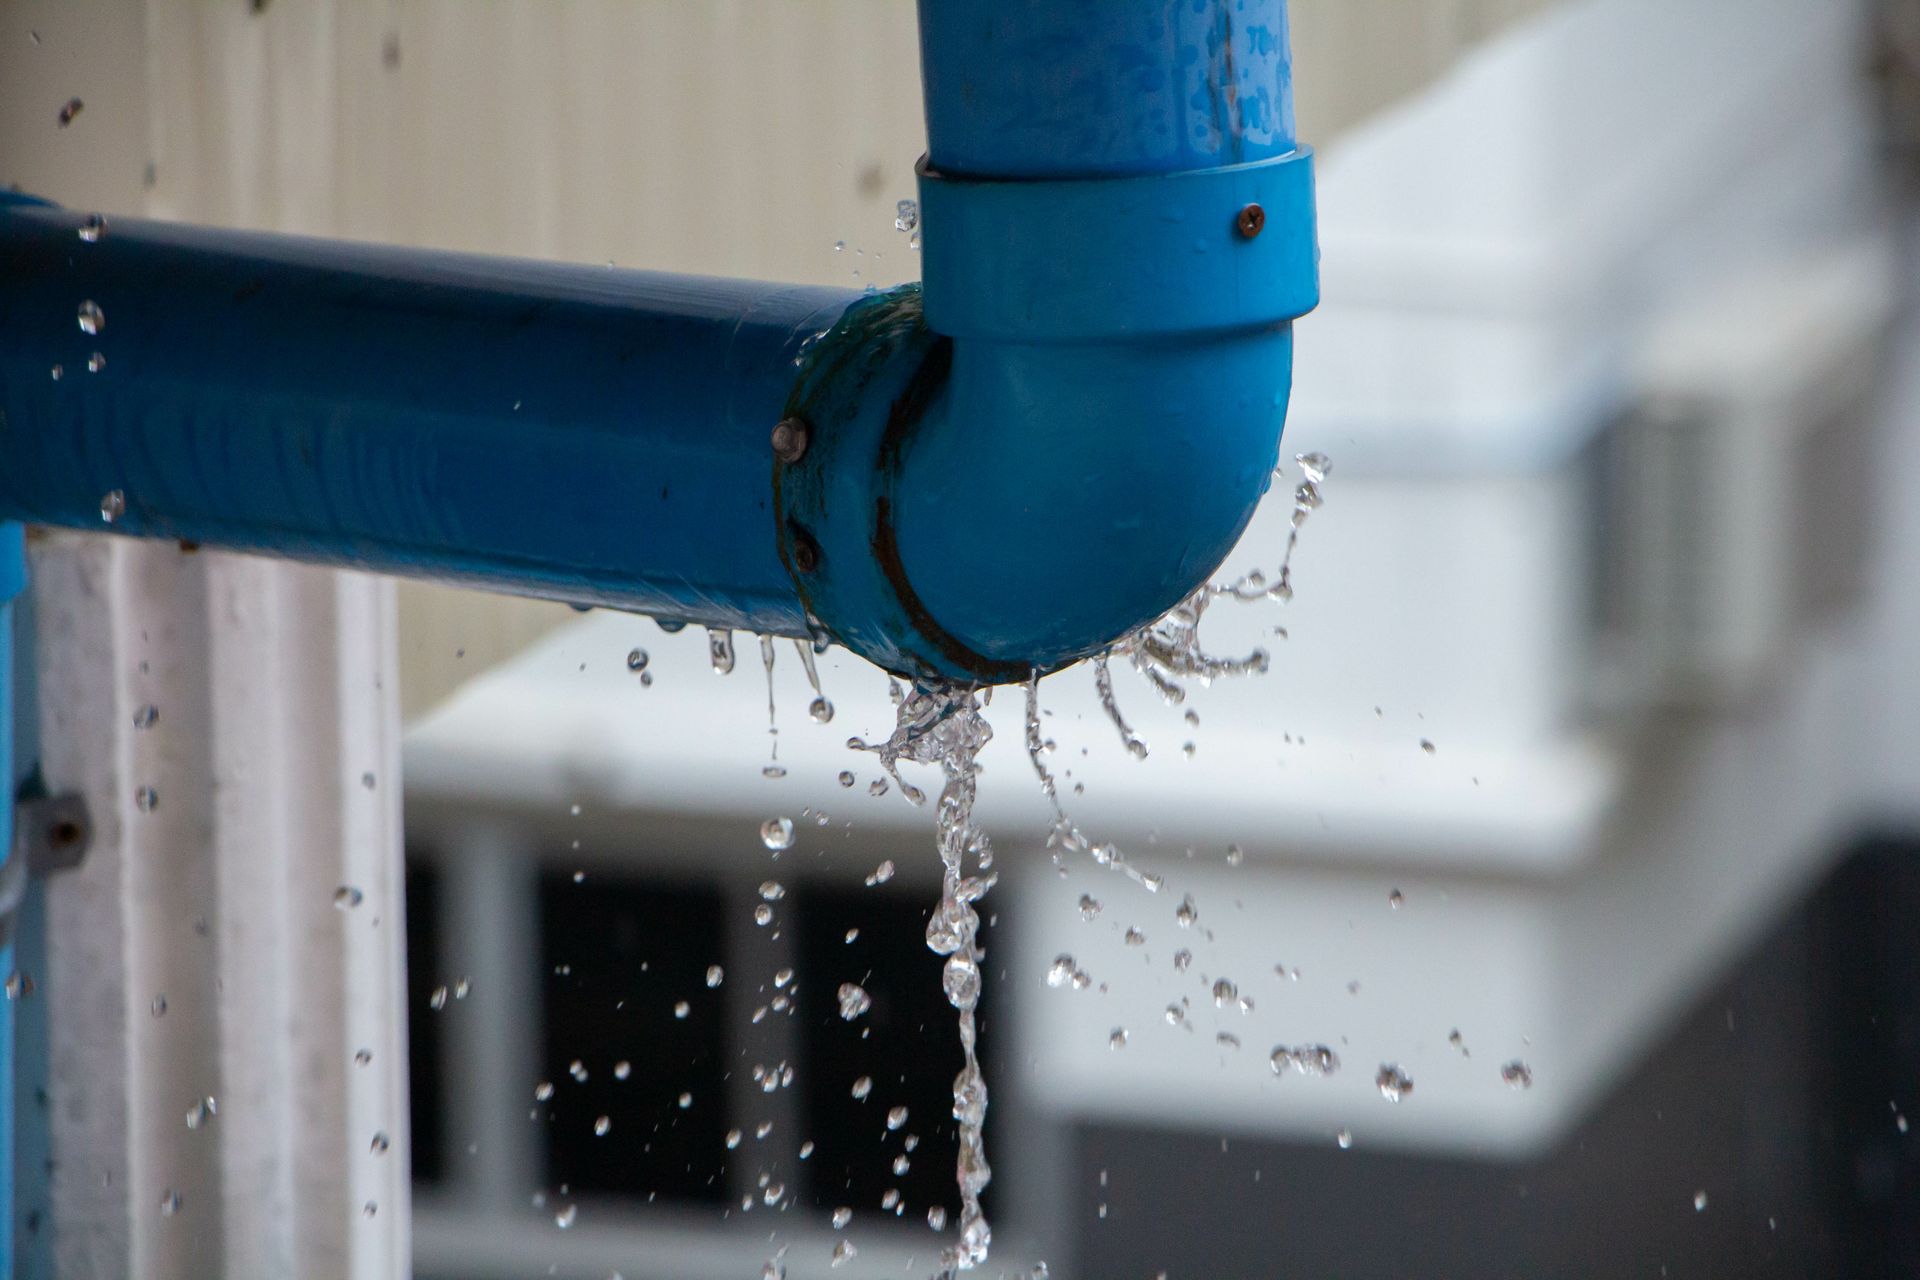 Closeup of a plastic pipe leaking water and creating splashes during a rainy day.